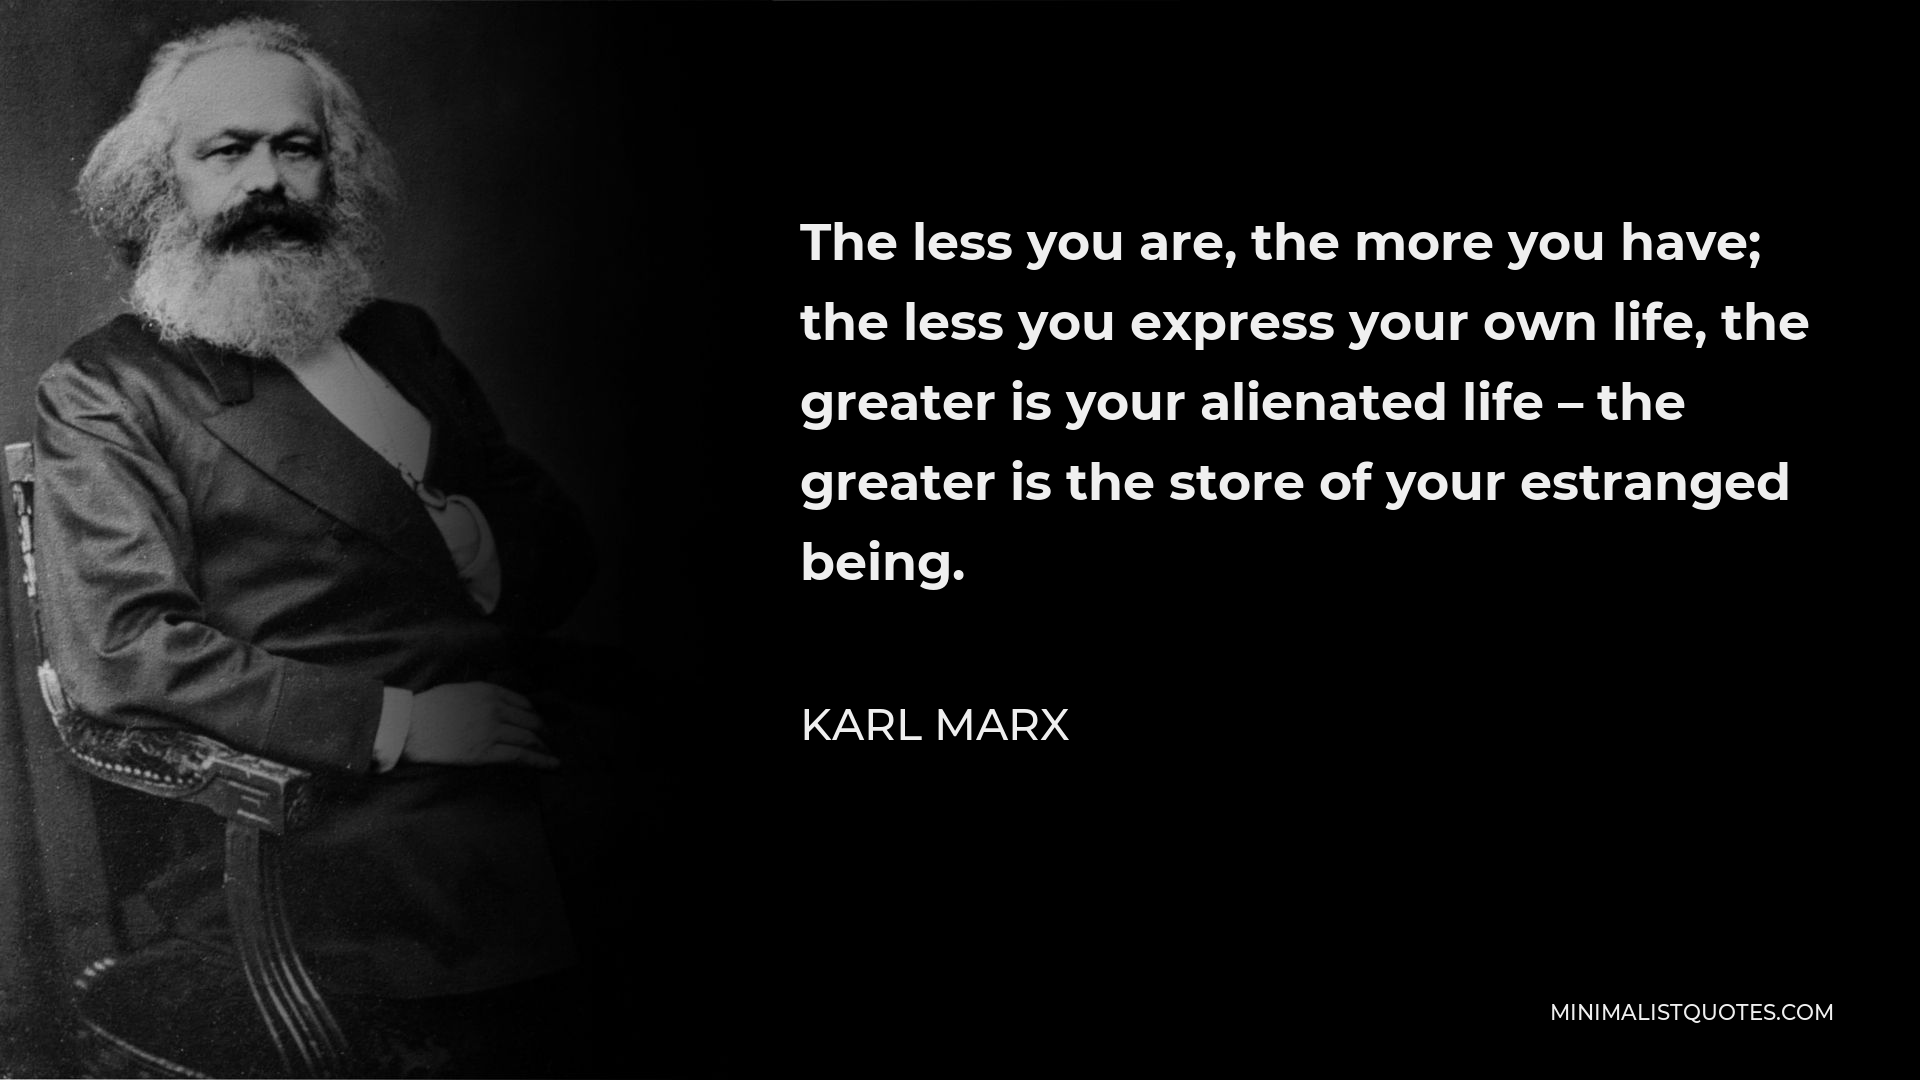 Karl Marx Quote - The less you are, the more you have; the less you express your own life, the greater is your alienated life – the greater is the store of your estranged being.